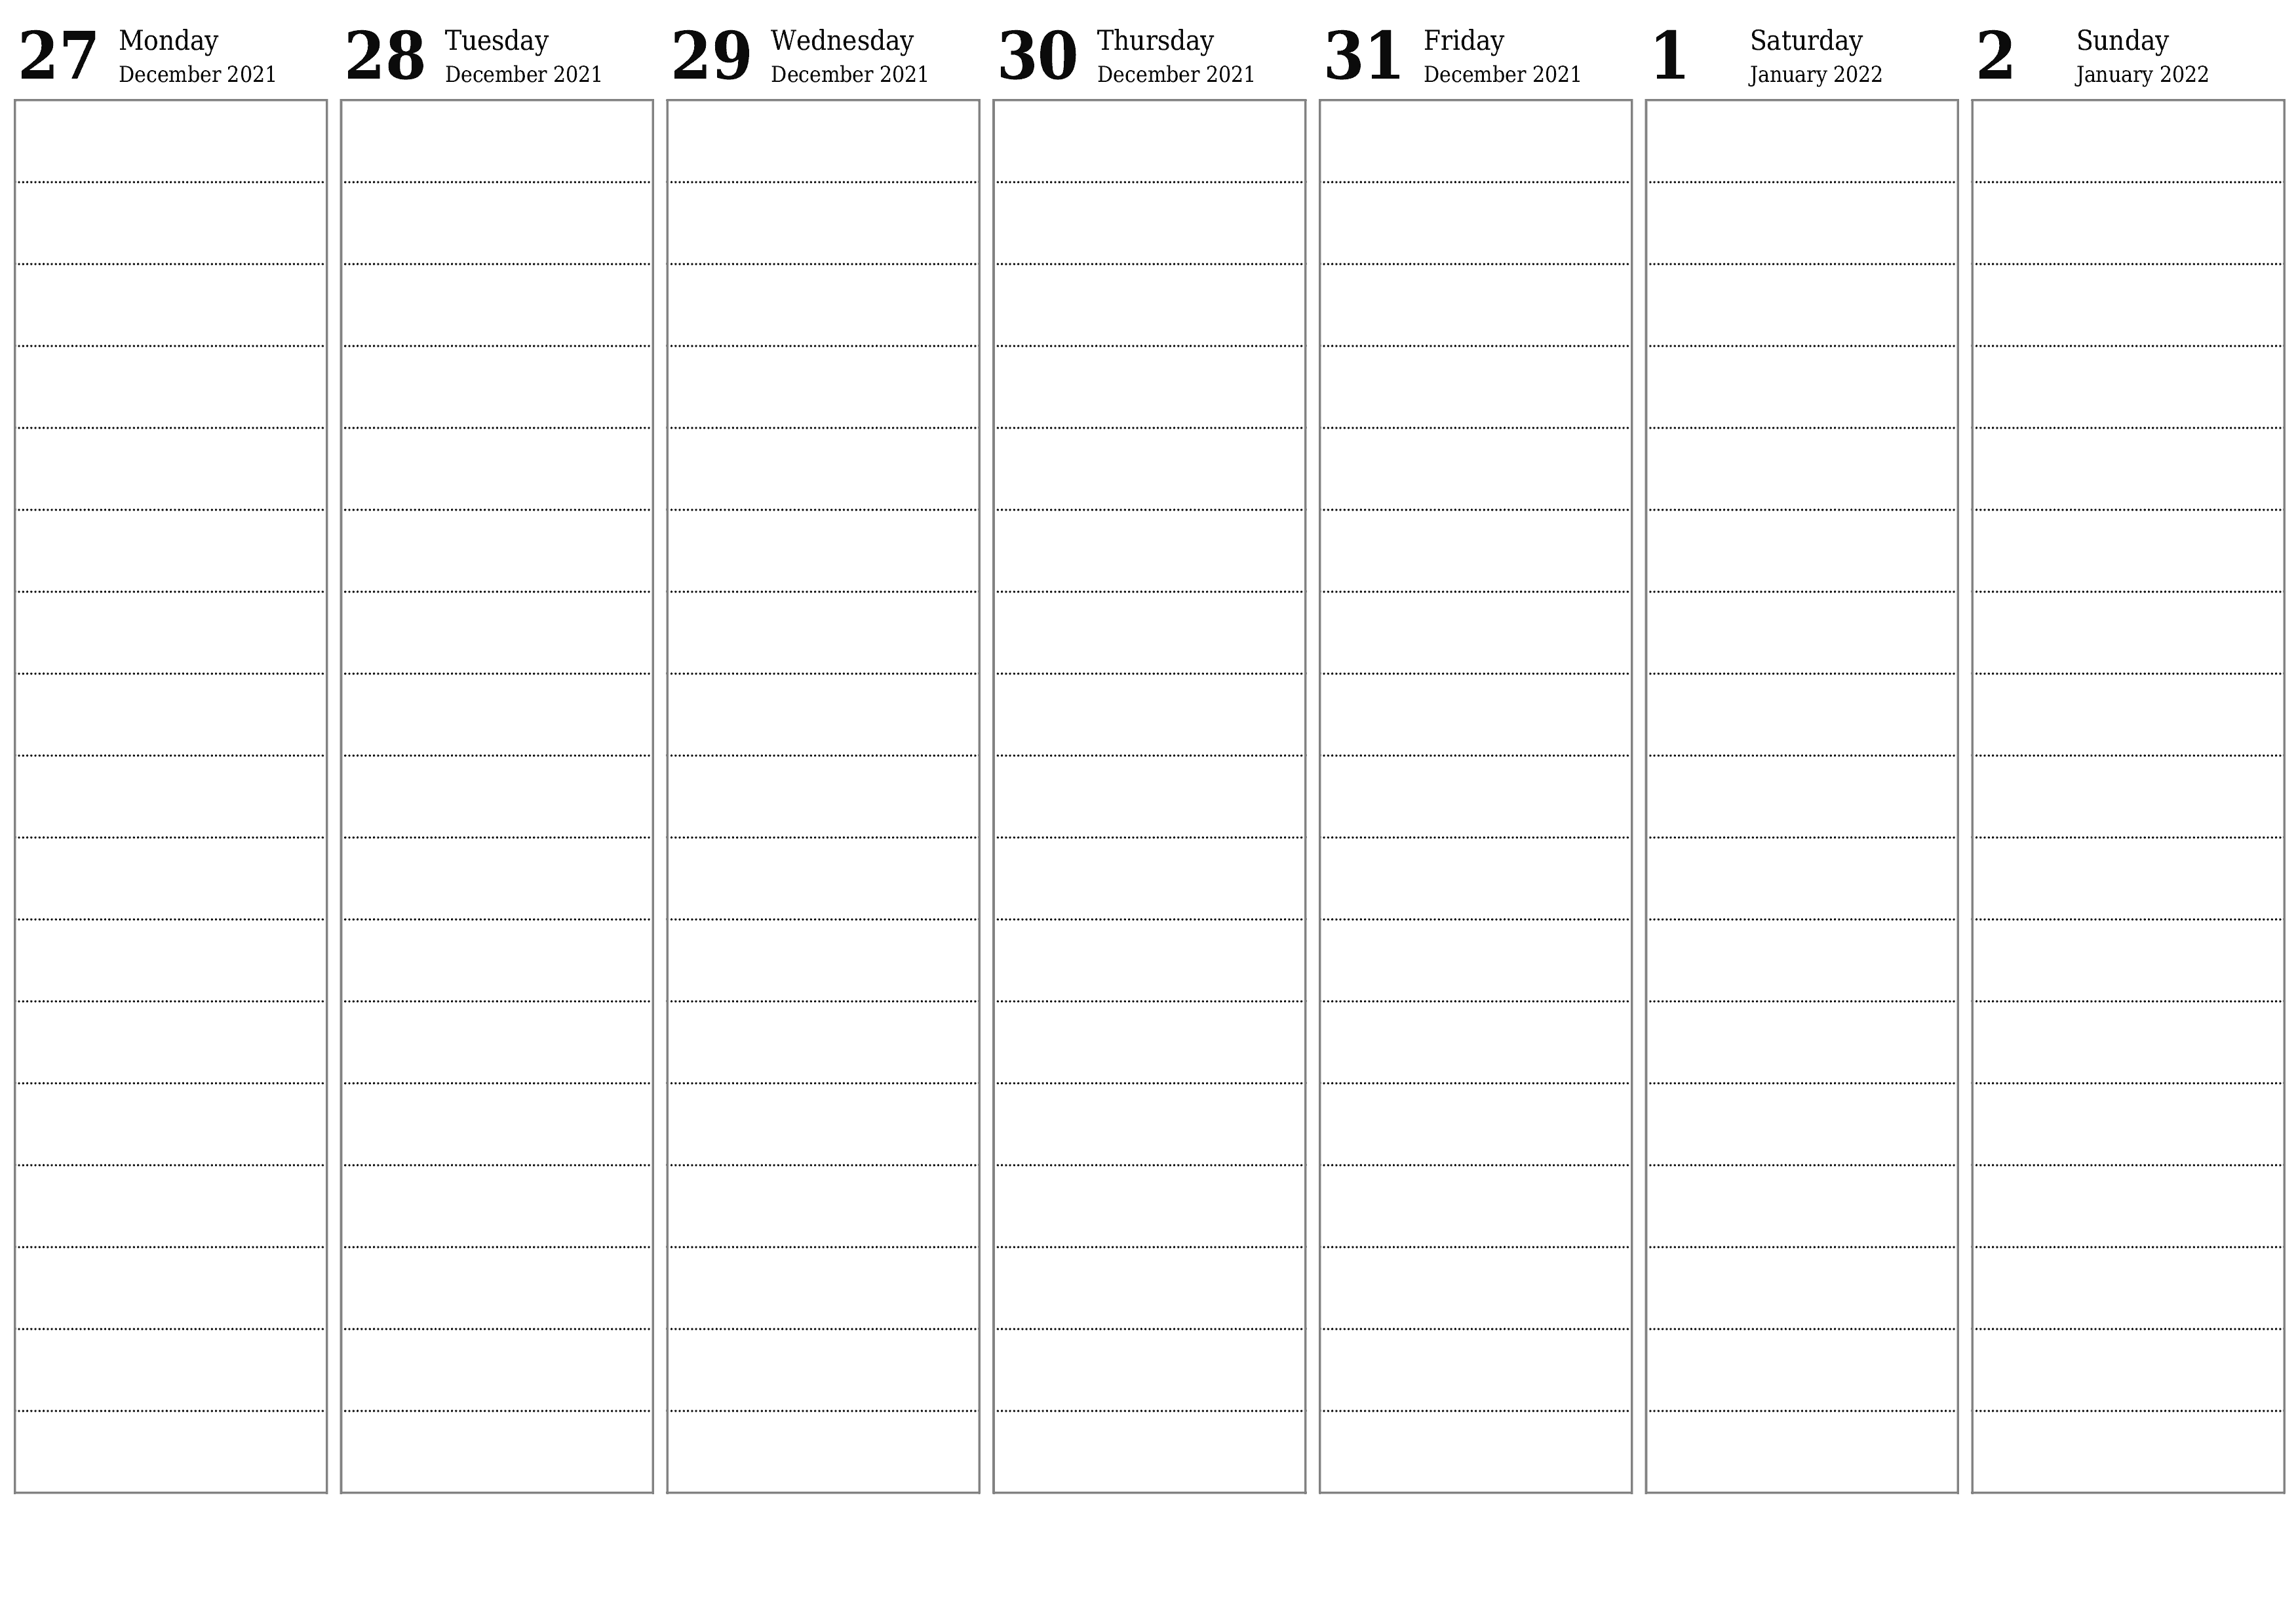 Blank weekly printable calendar and planner for week January 2022 with notes, save and print to PDF PNG English